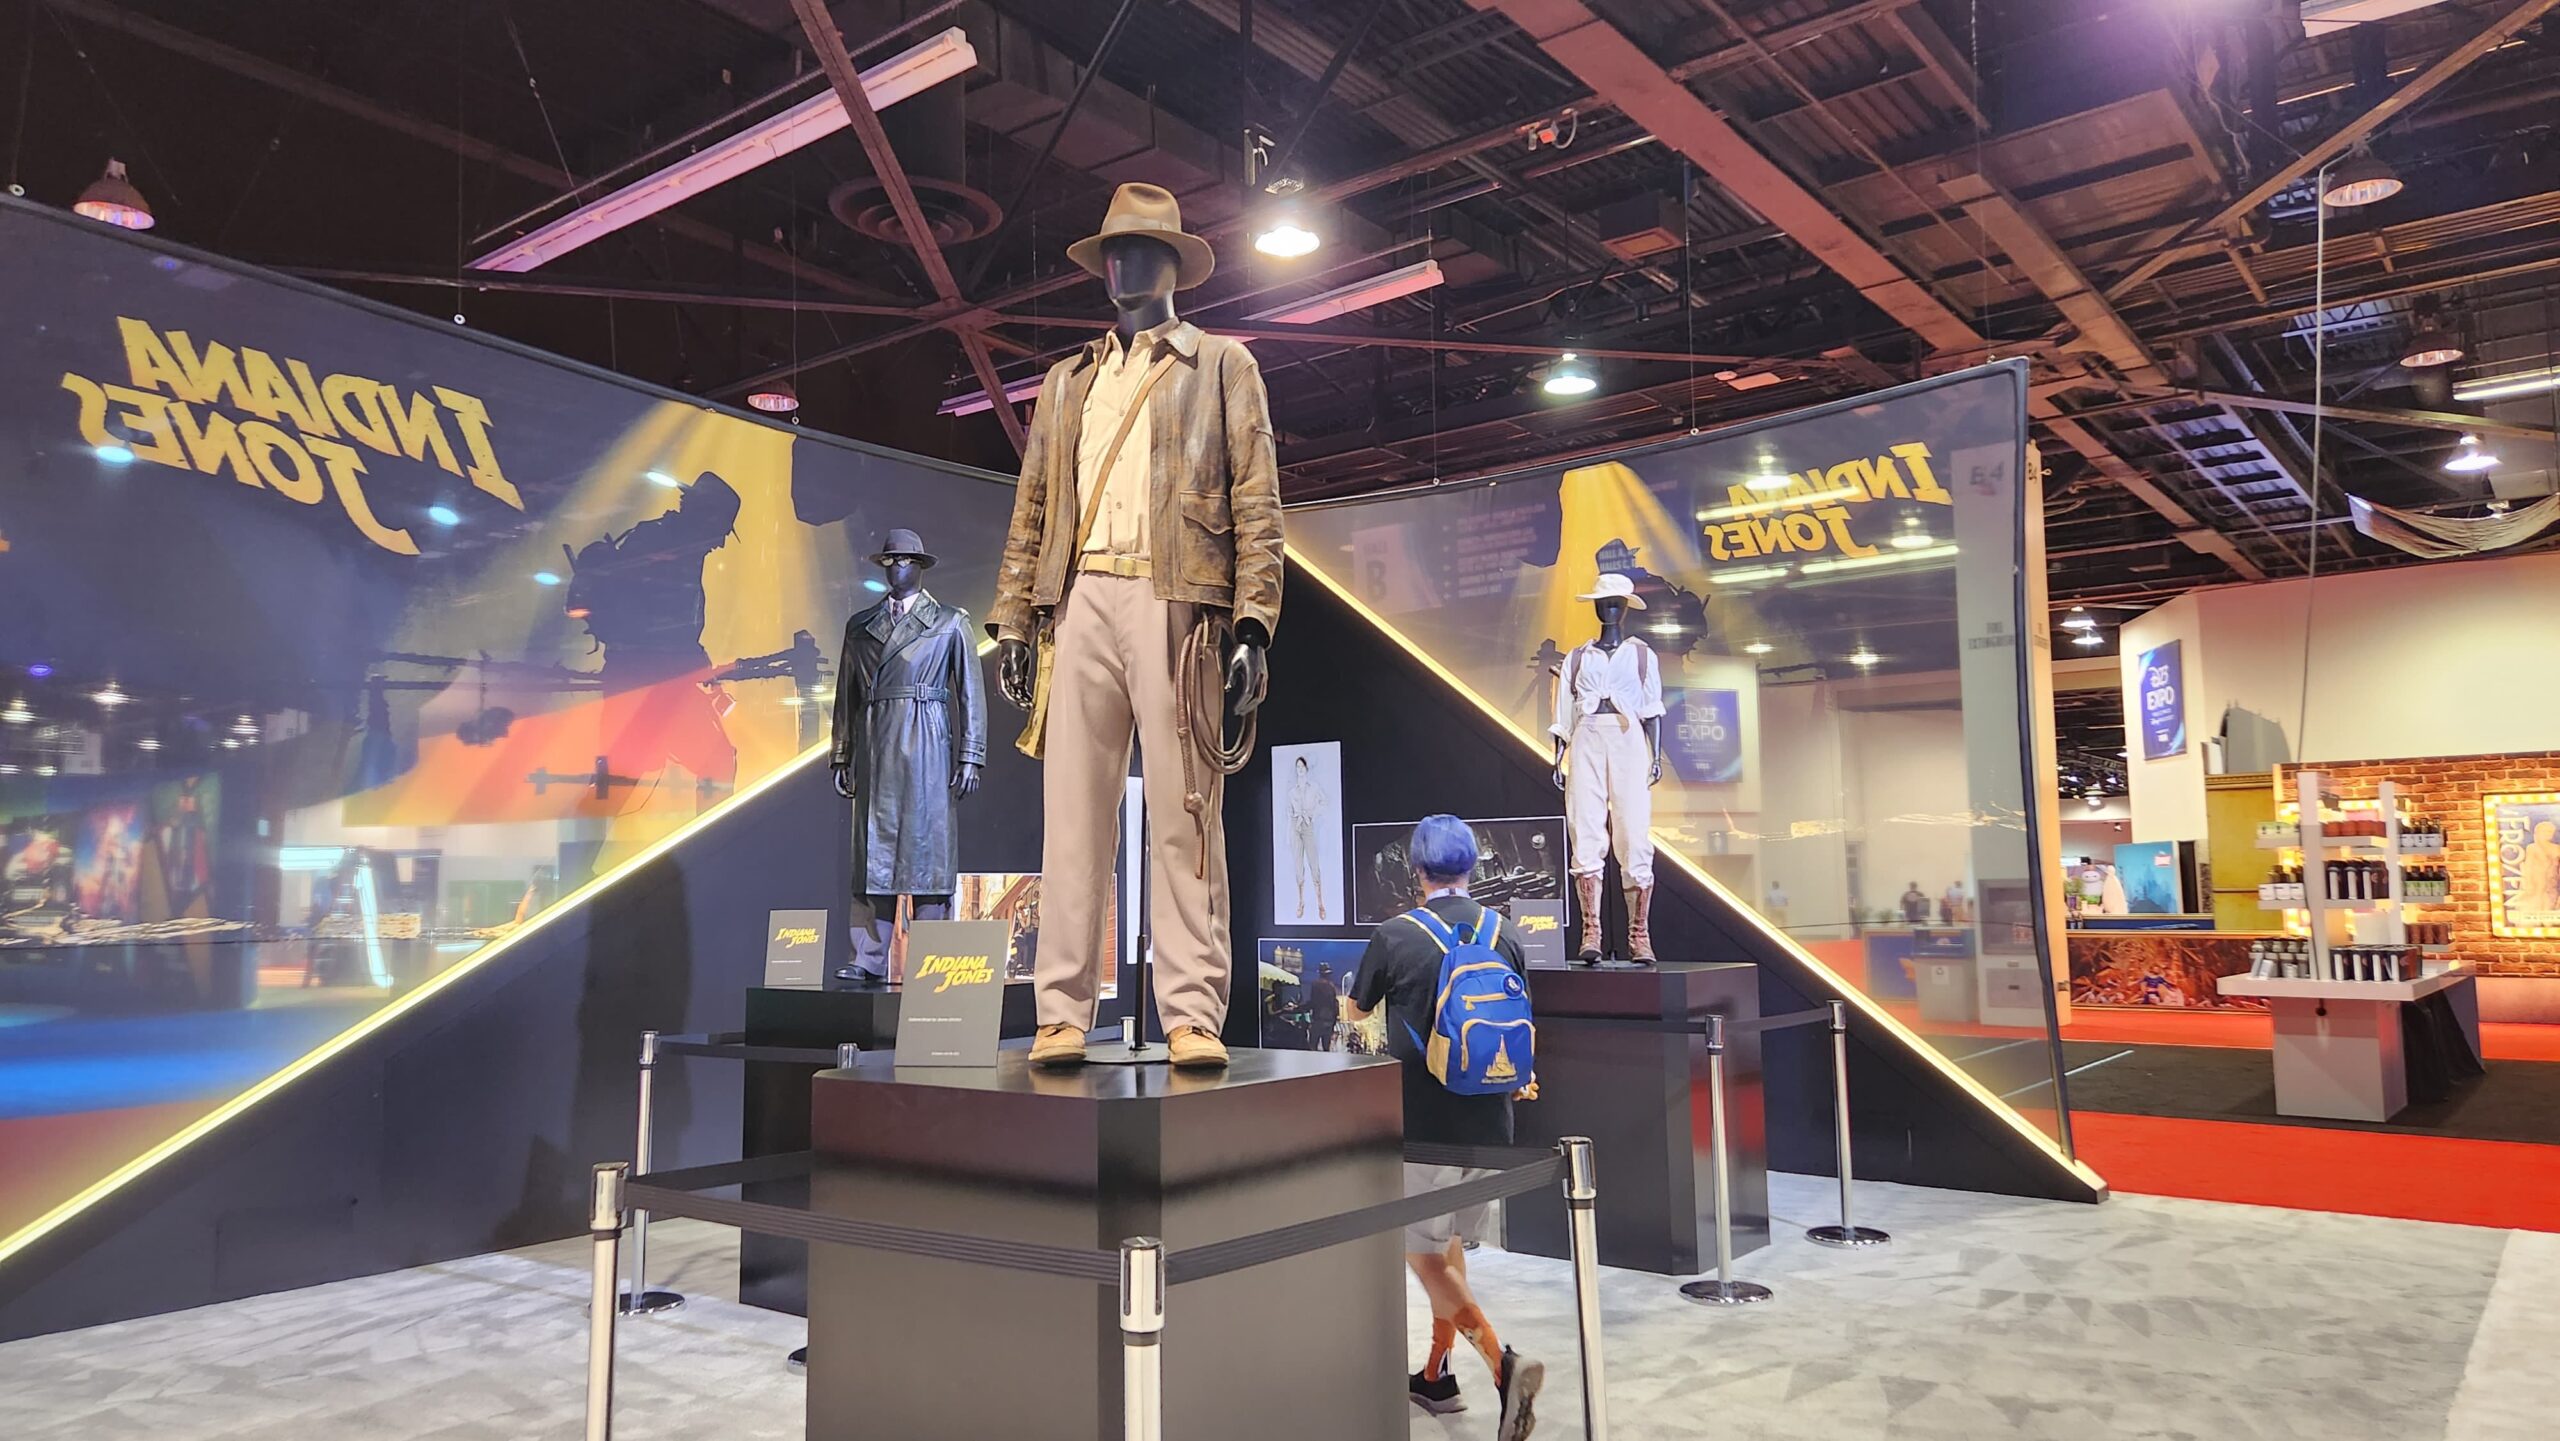 First Look at the 'Indiana Jones 5' & 'Willow' Costumes from the D23 Expo 2022